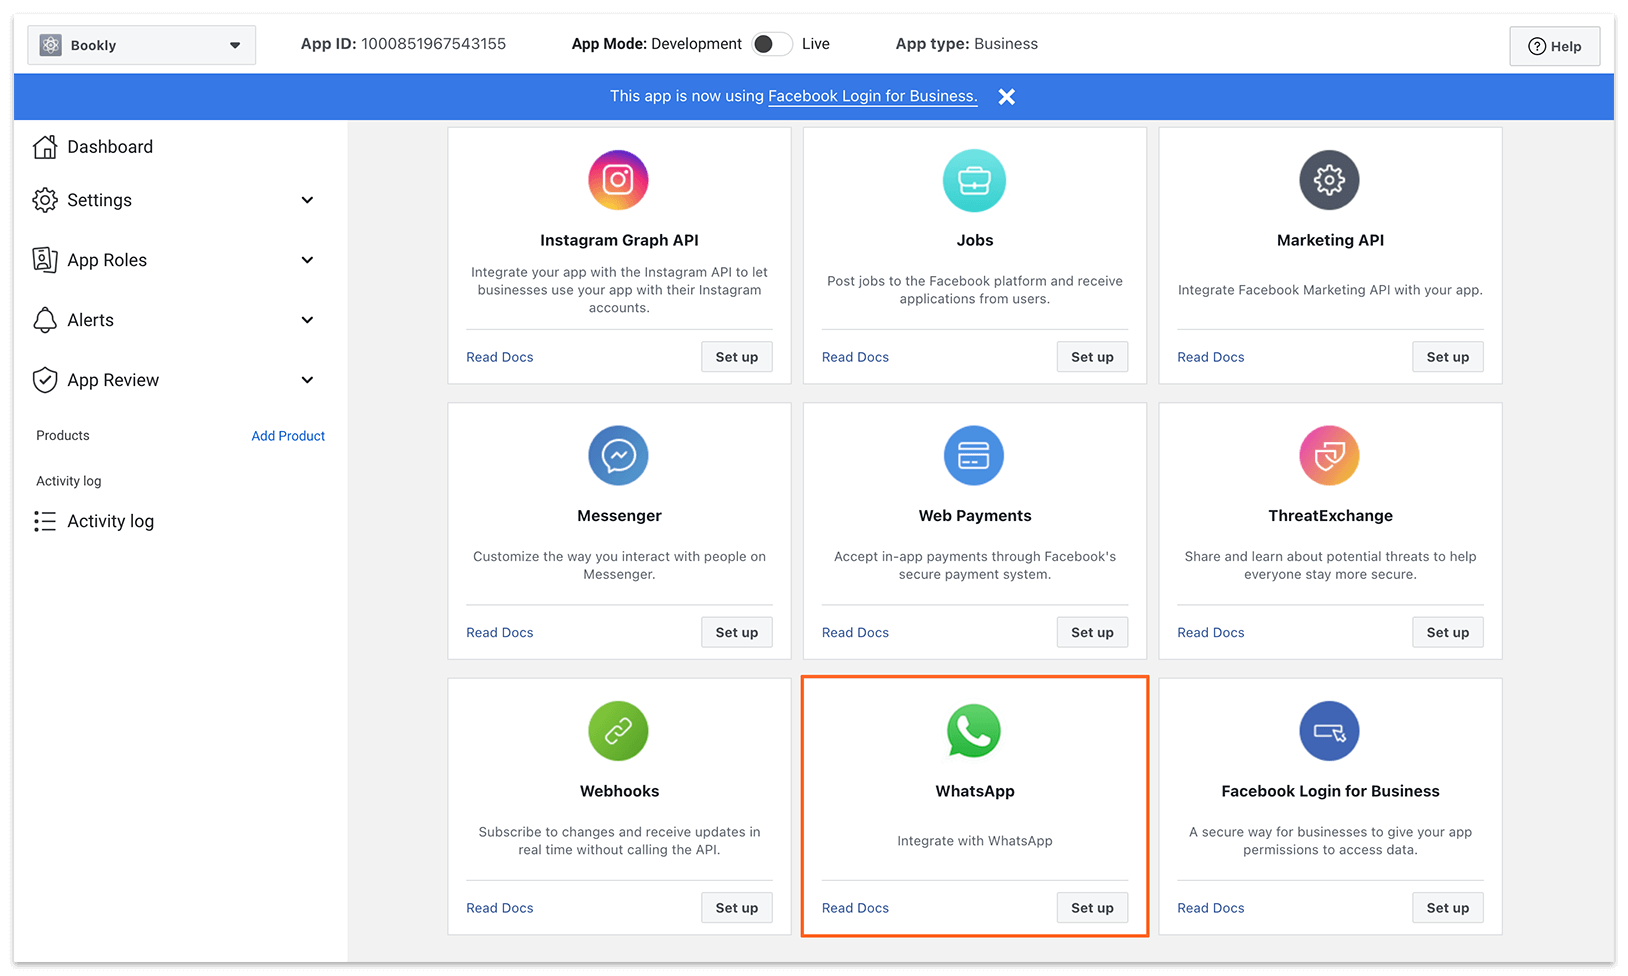 Add products to your App section